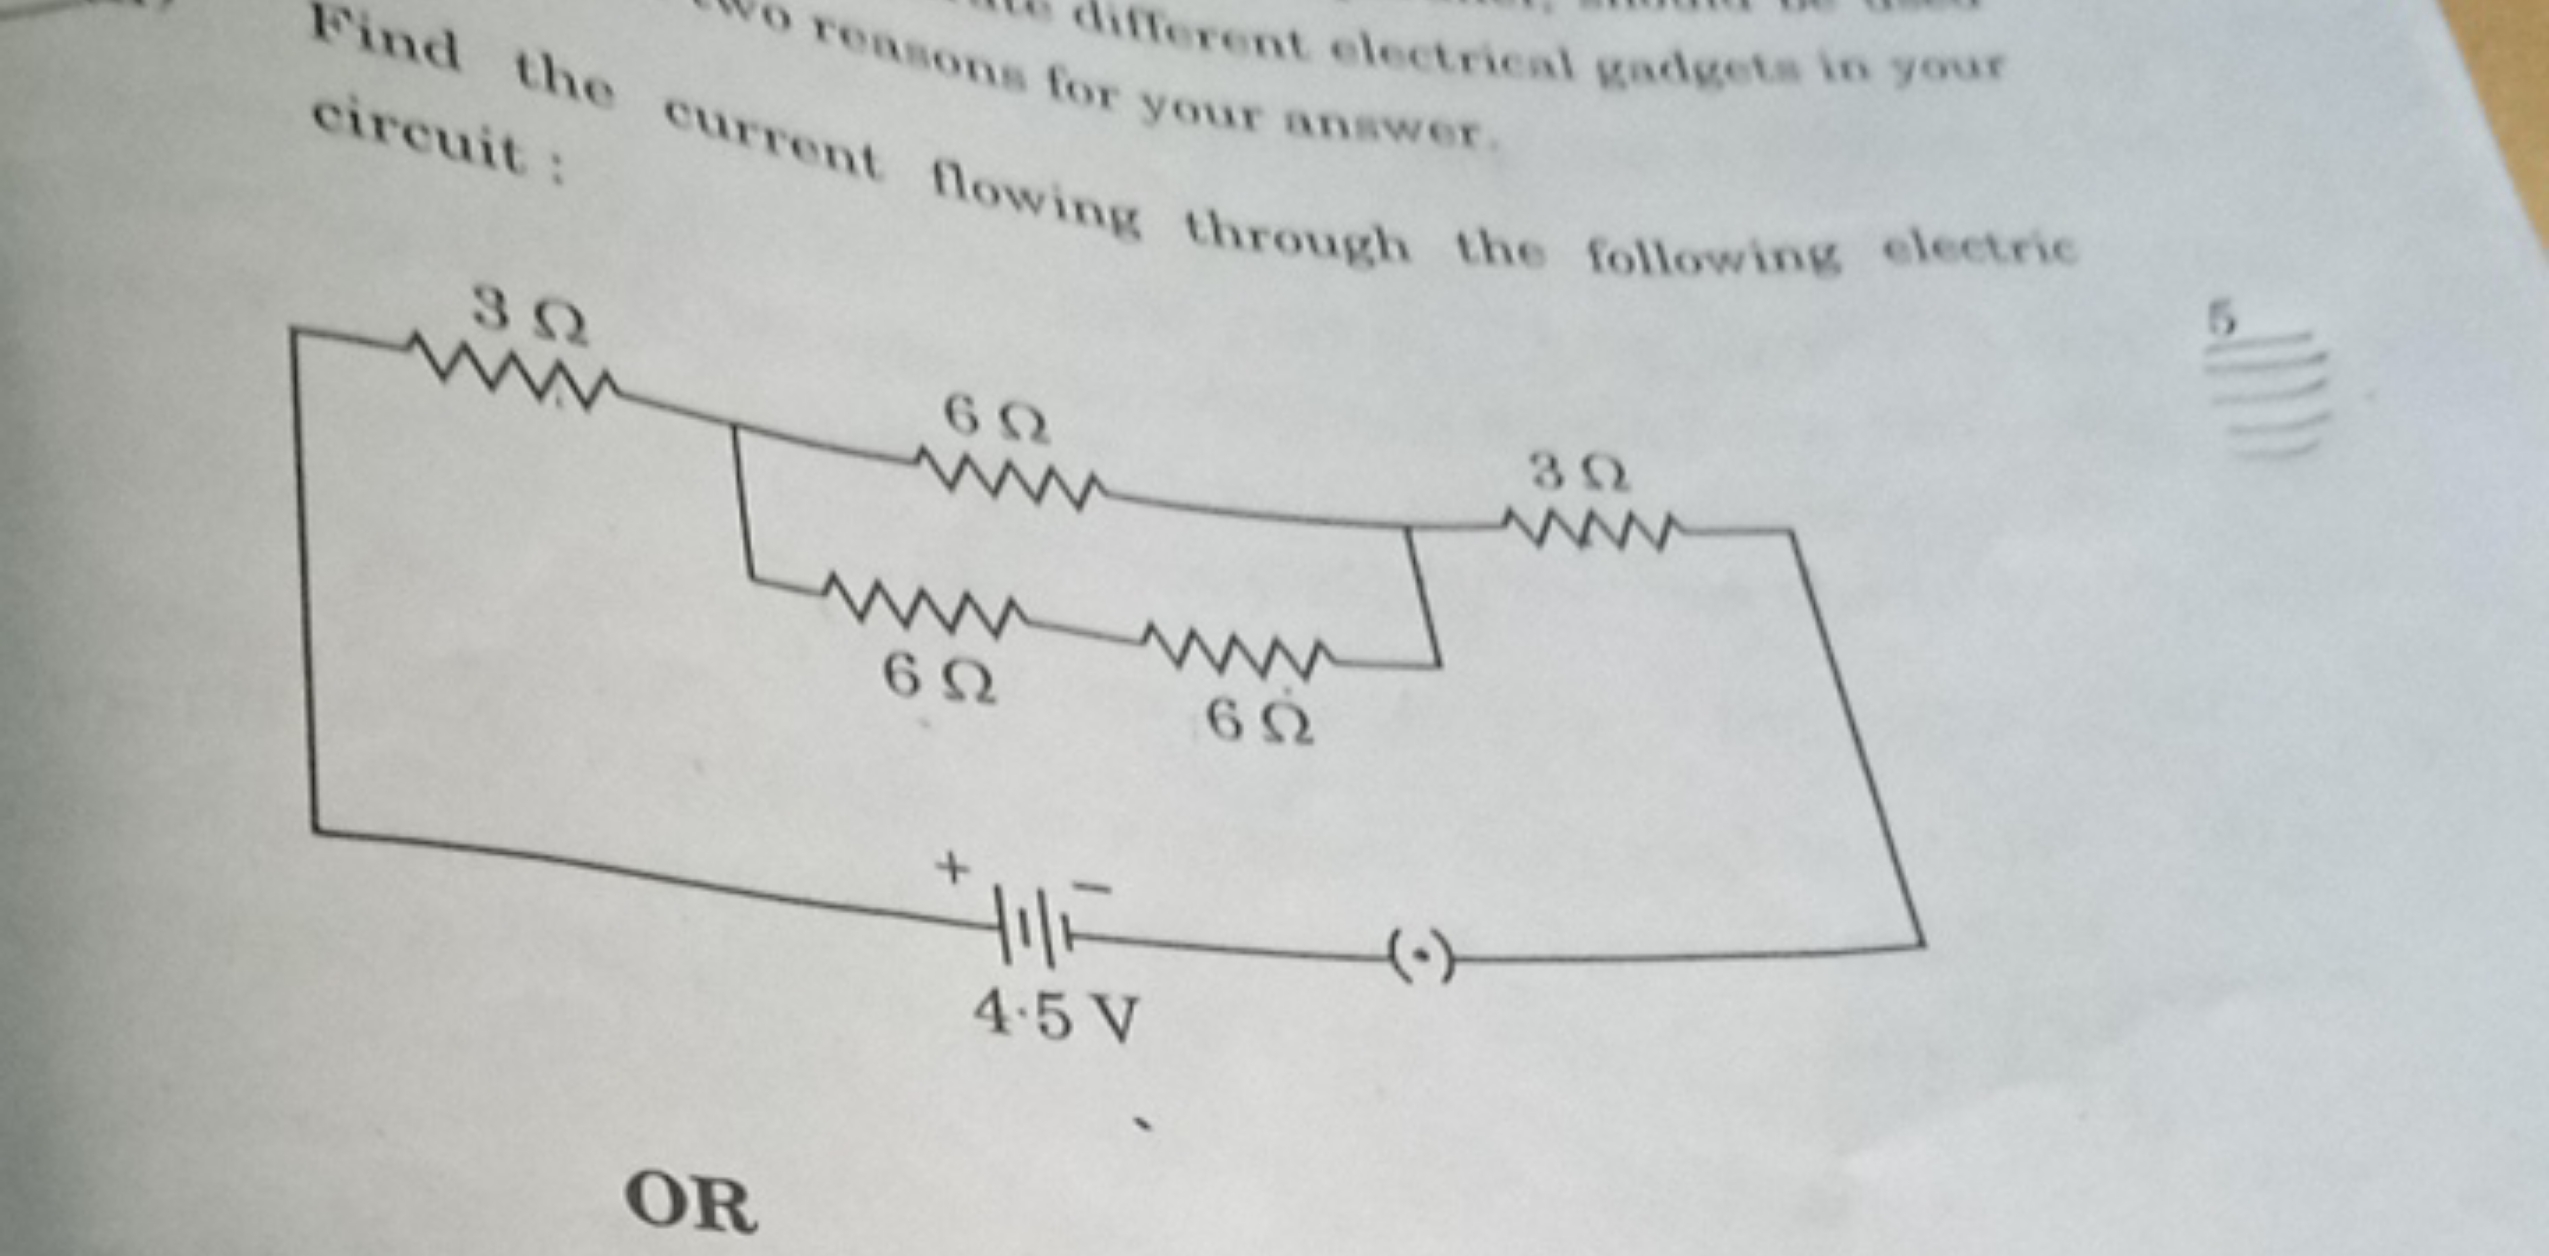 different electrical gadgets in your circuit :
conons for your answer.